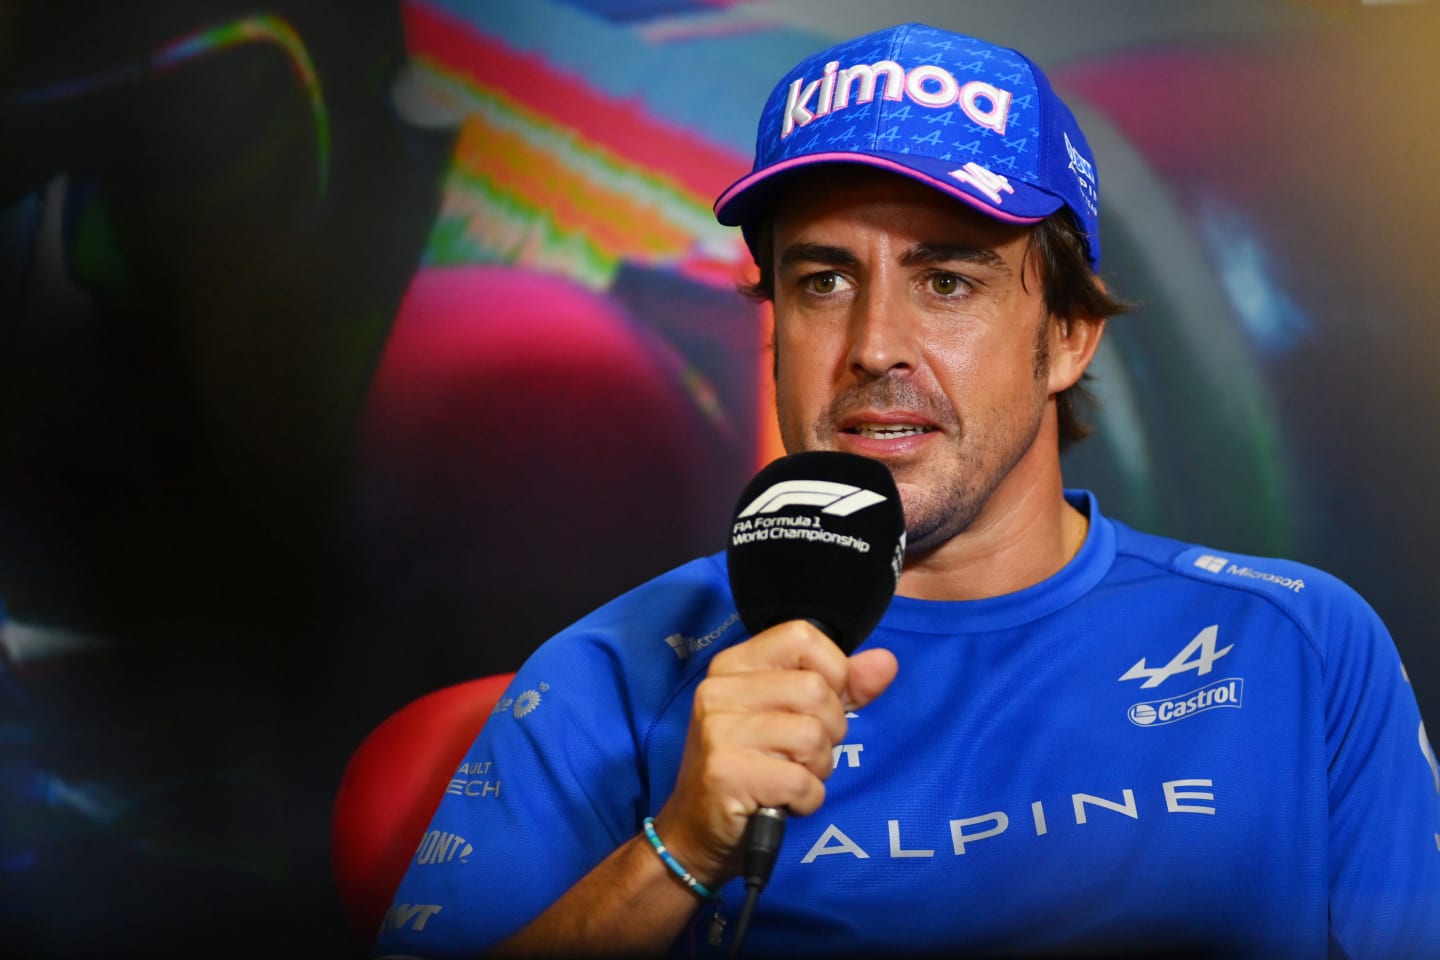 MONZA, ITALY - SEPTEMBER 08: Fernando Alonso of Spain and Alpine F1 talks in the drivers press conference during previews ahead of the F1 Grand Prix of Italy at Autodromo Nazionale Monza on September 08, 2022 in Monza, Italy. (Photo by Dan Mullan/Getty Images)